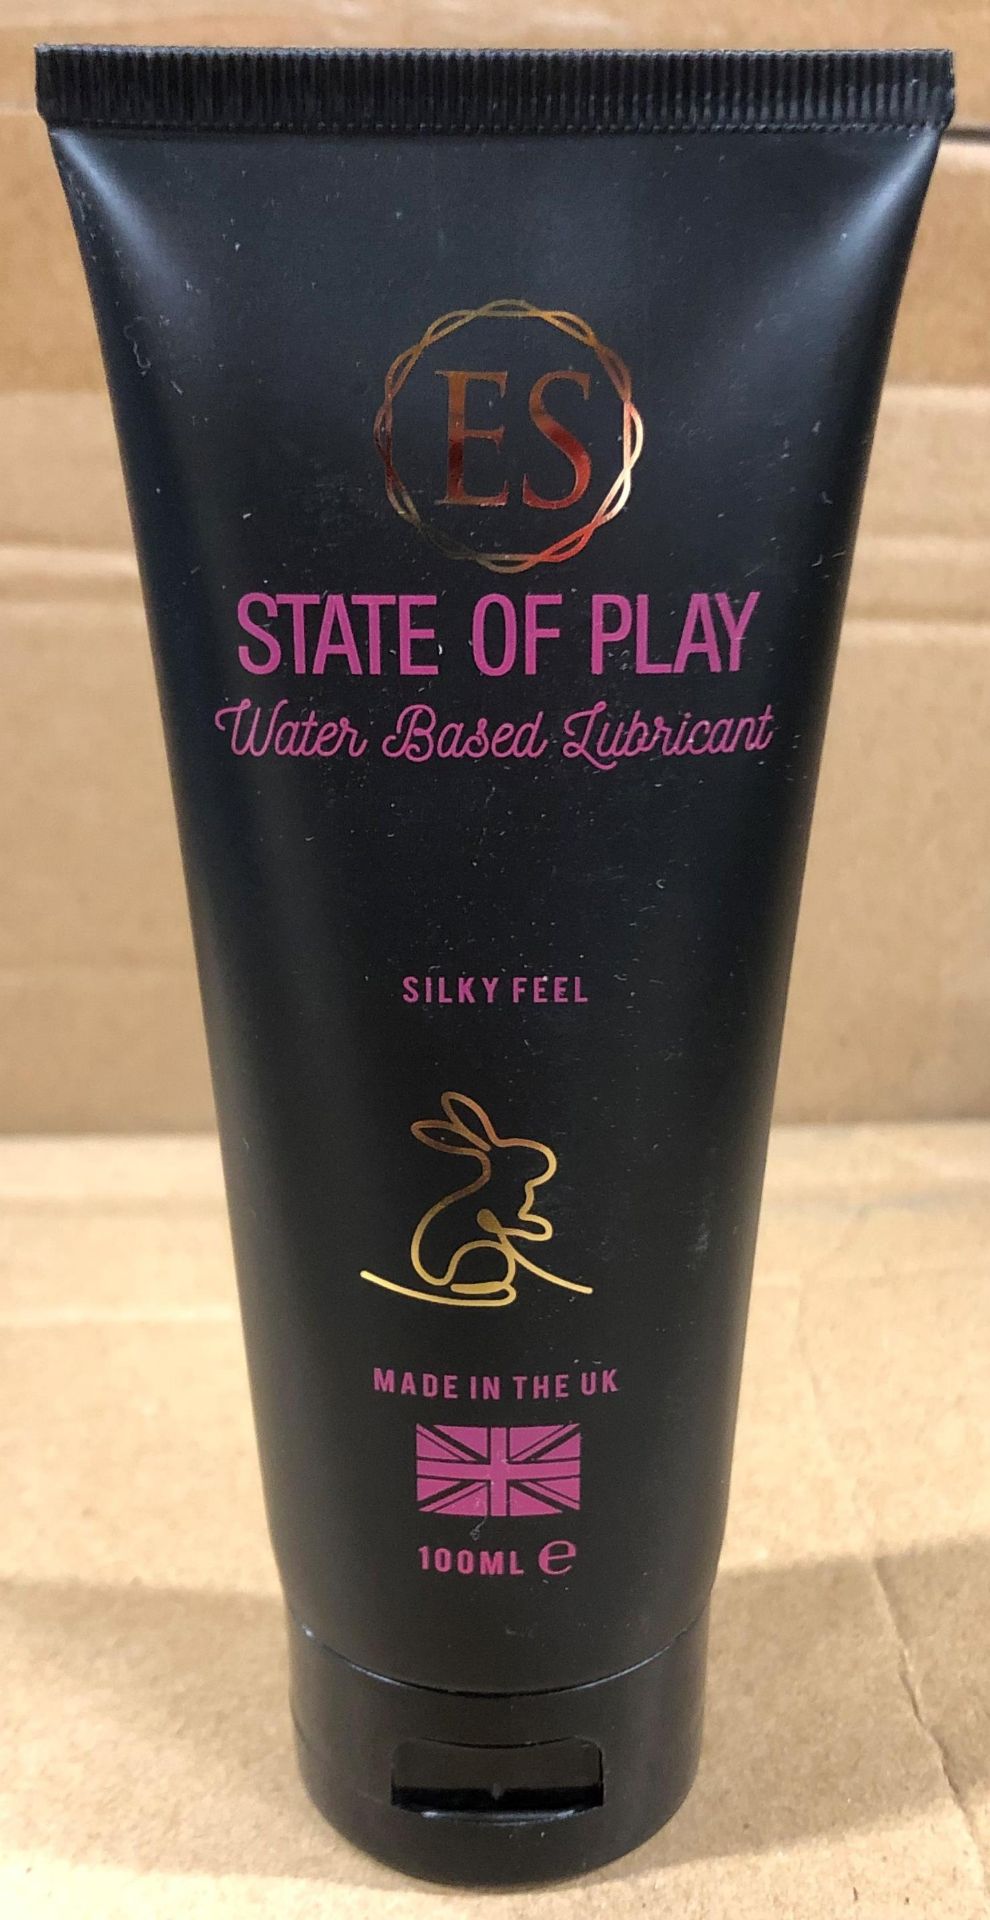 3 BOXES 6 LUBRICANT 100ml BRAND EROTIC STATE OF PLAY